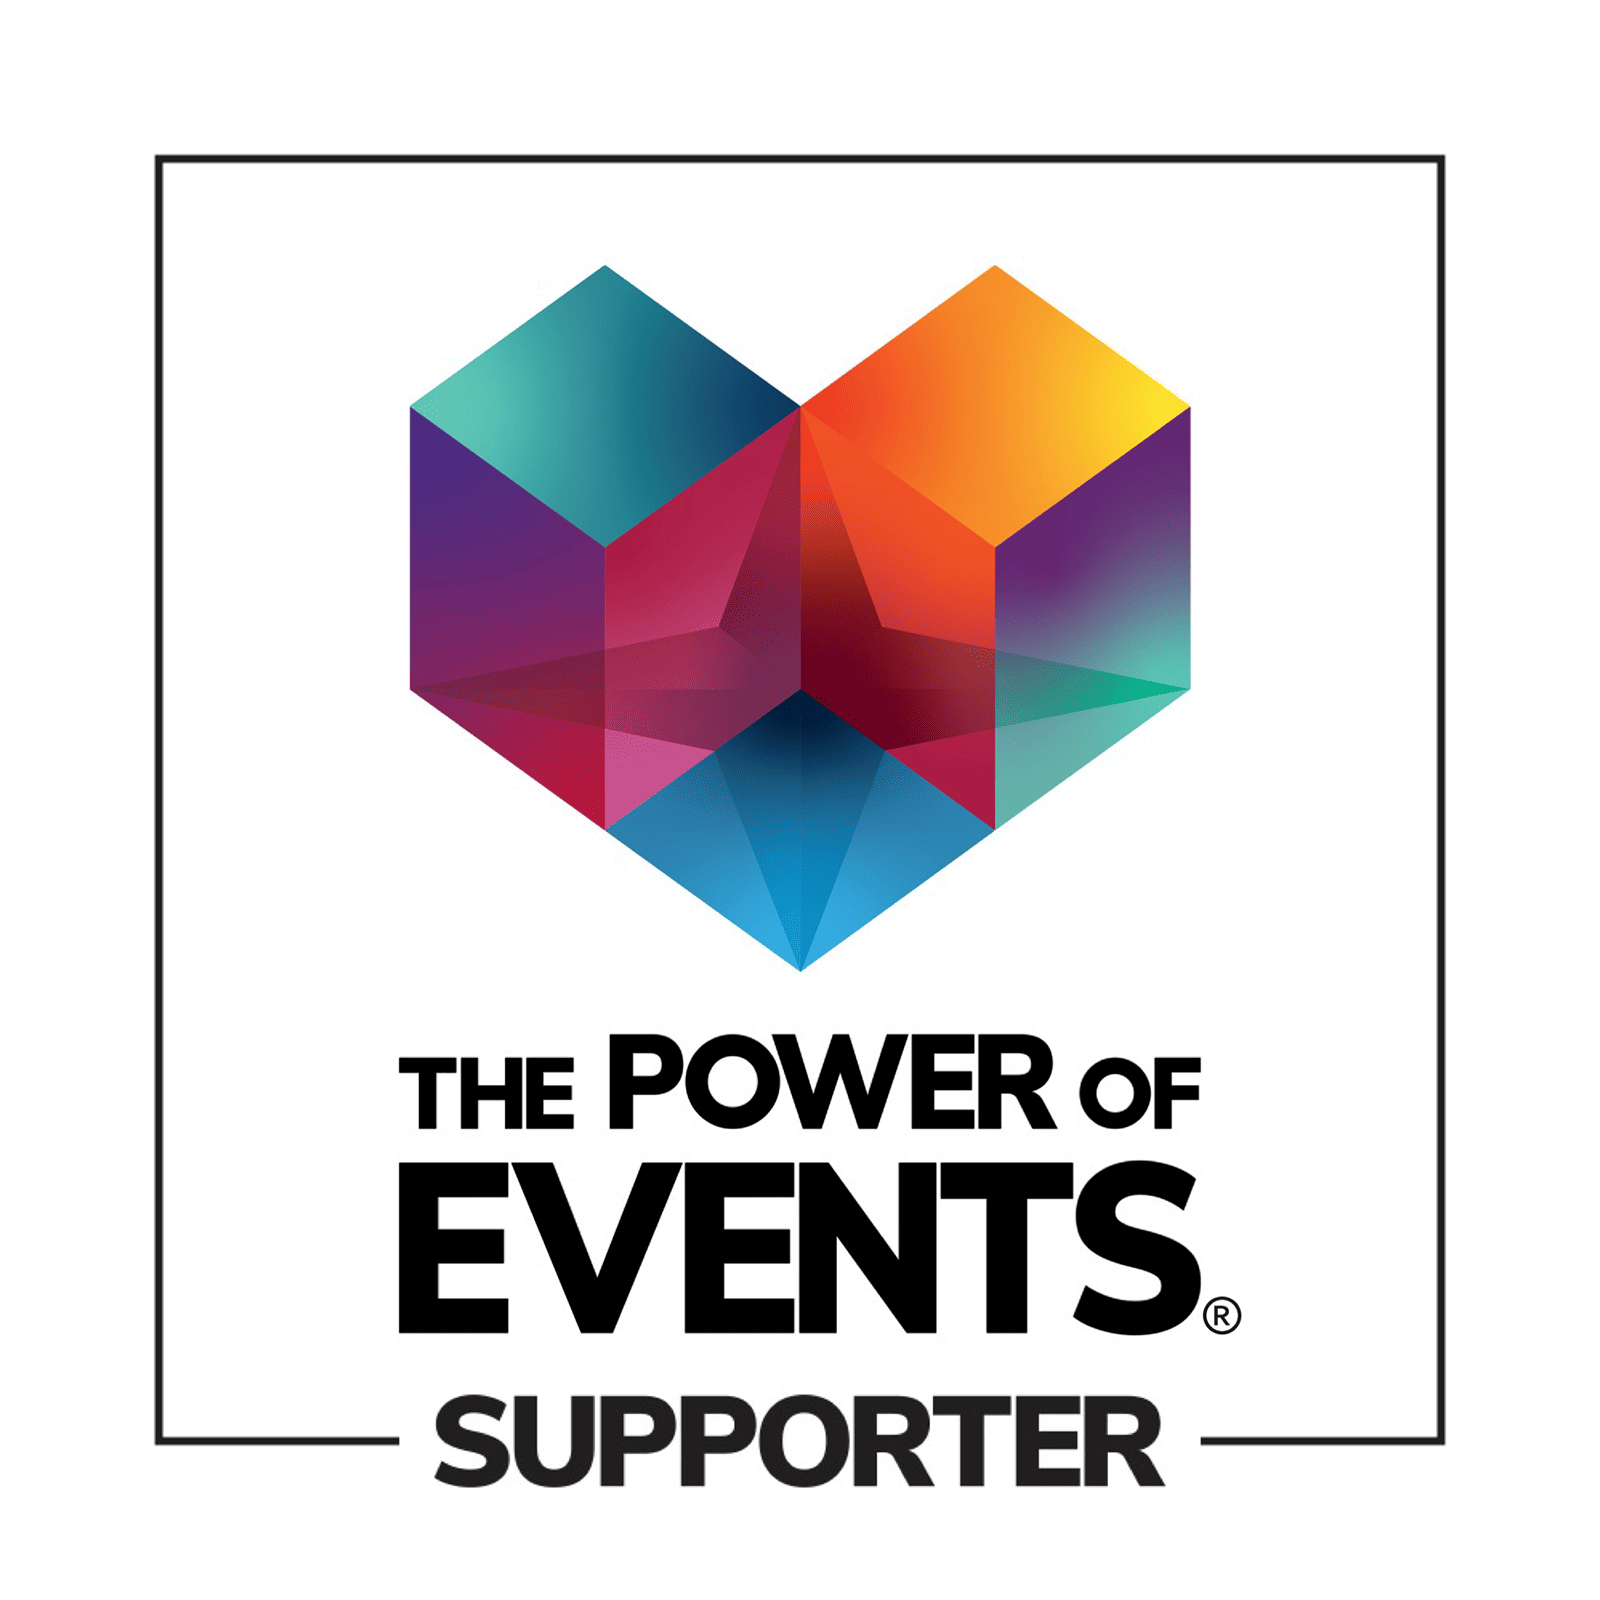 The Power of Events Supporter